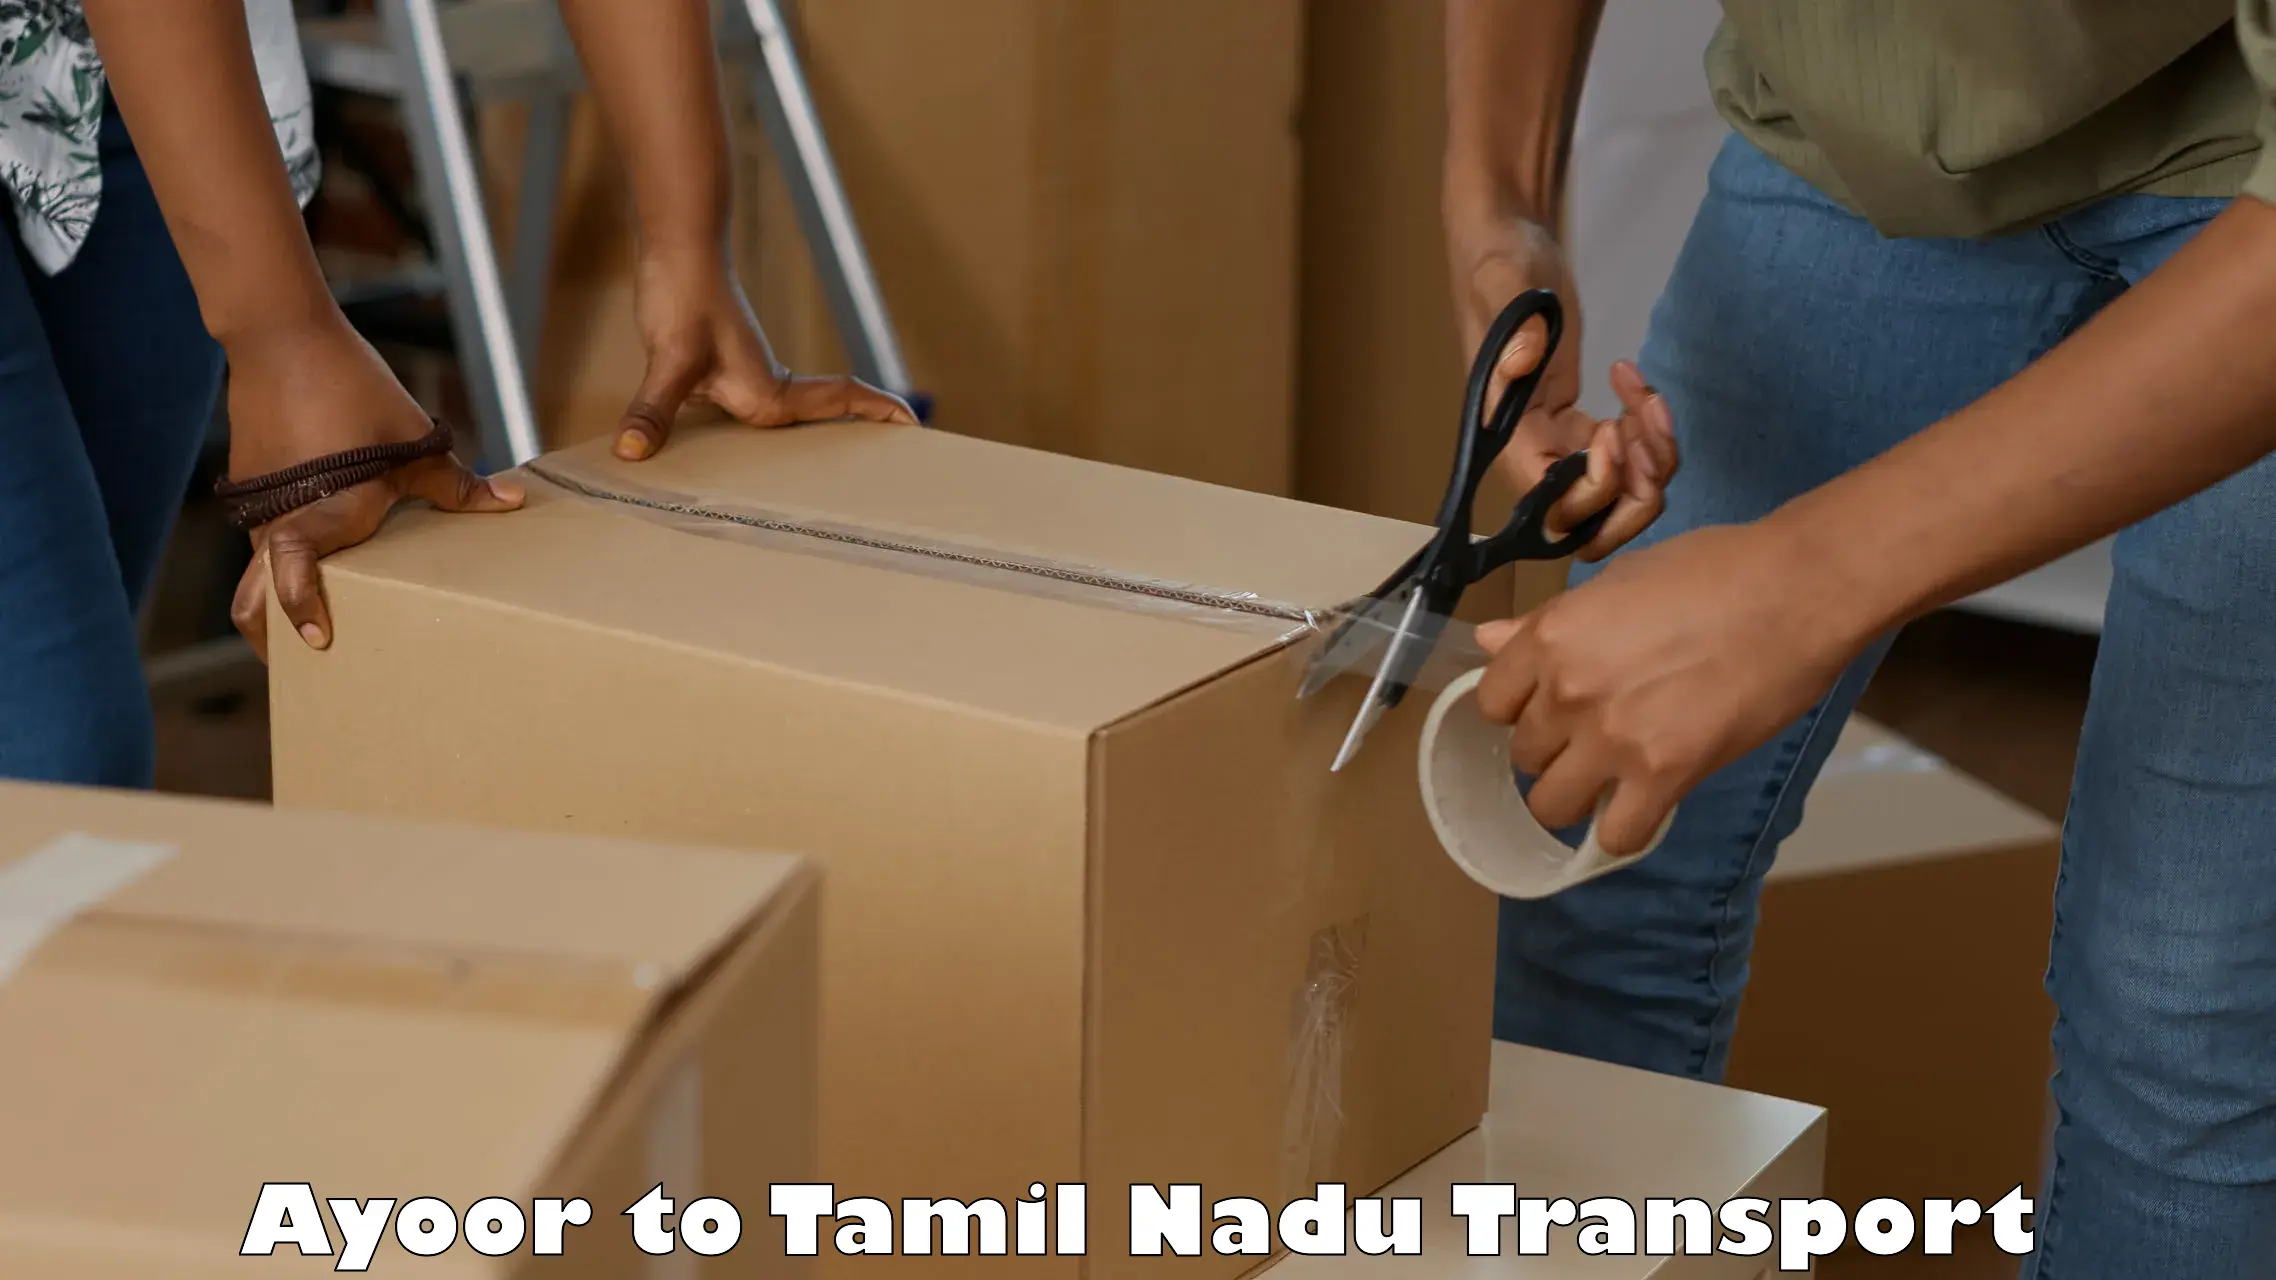 Domestic transport services Ayoor to Perambalur